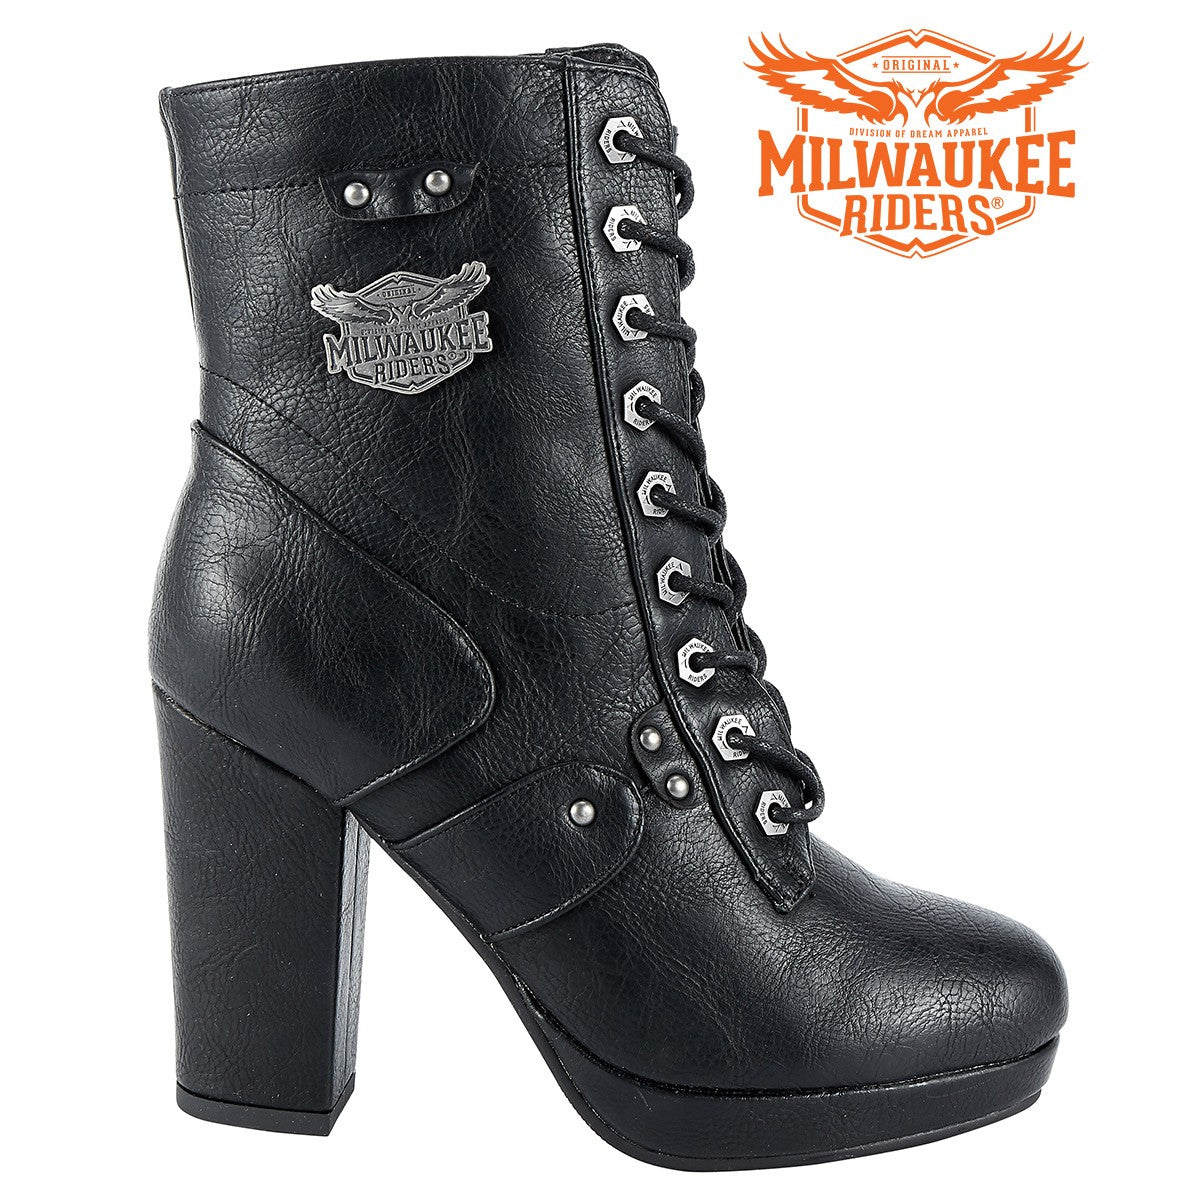 Womens Leather Zippered Chunky Heel Boots By Milwaukee Riders®